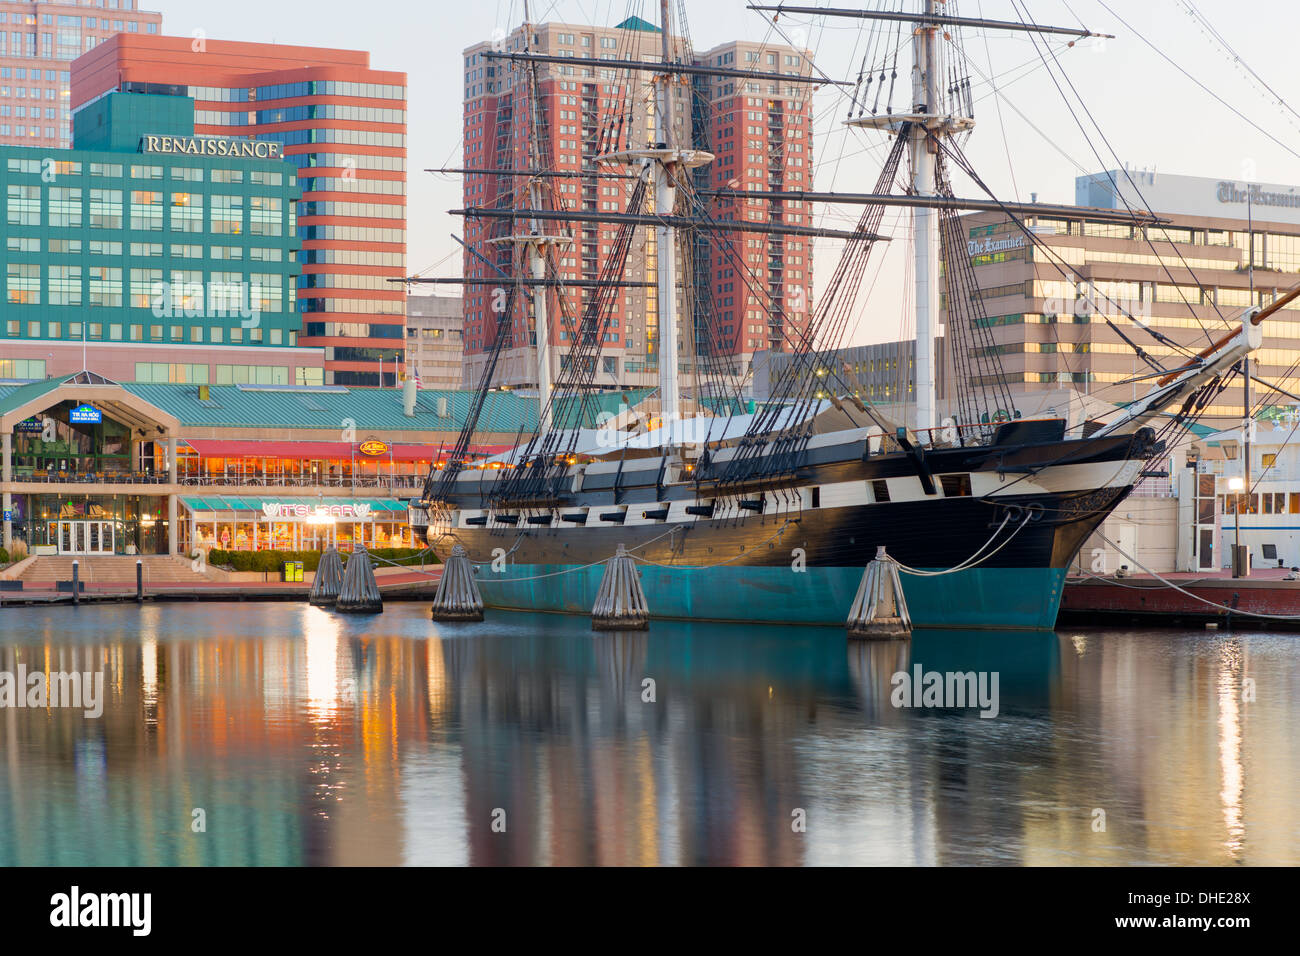 The historic sloop-of-war USS Constellation anchored in the Inner Harbor in Baltimore, Maryland. Stock Photo